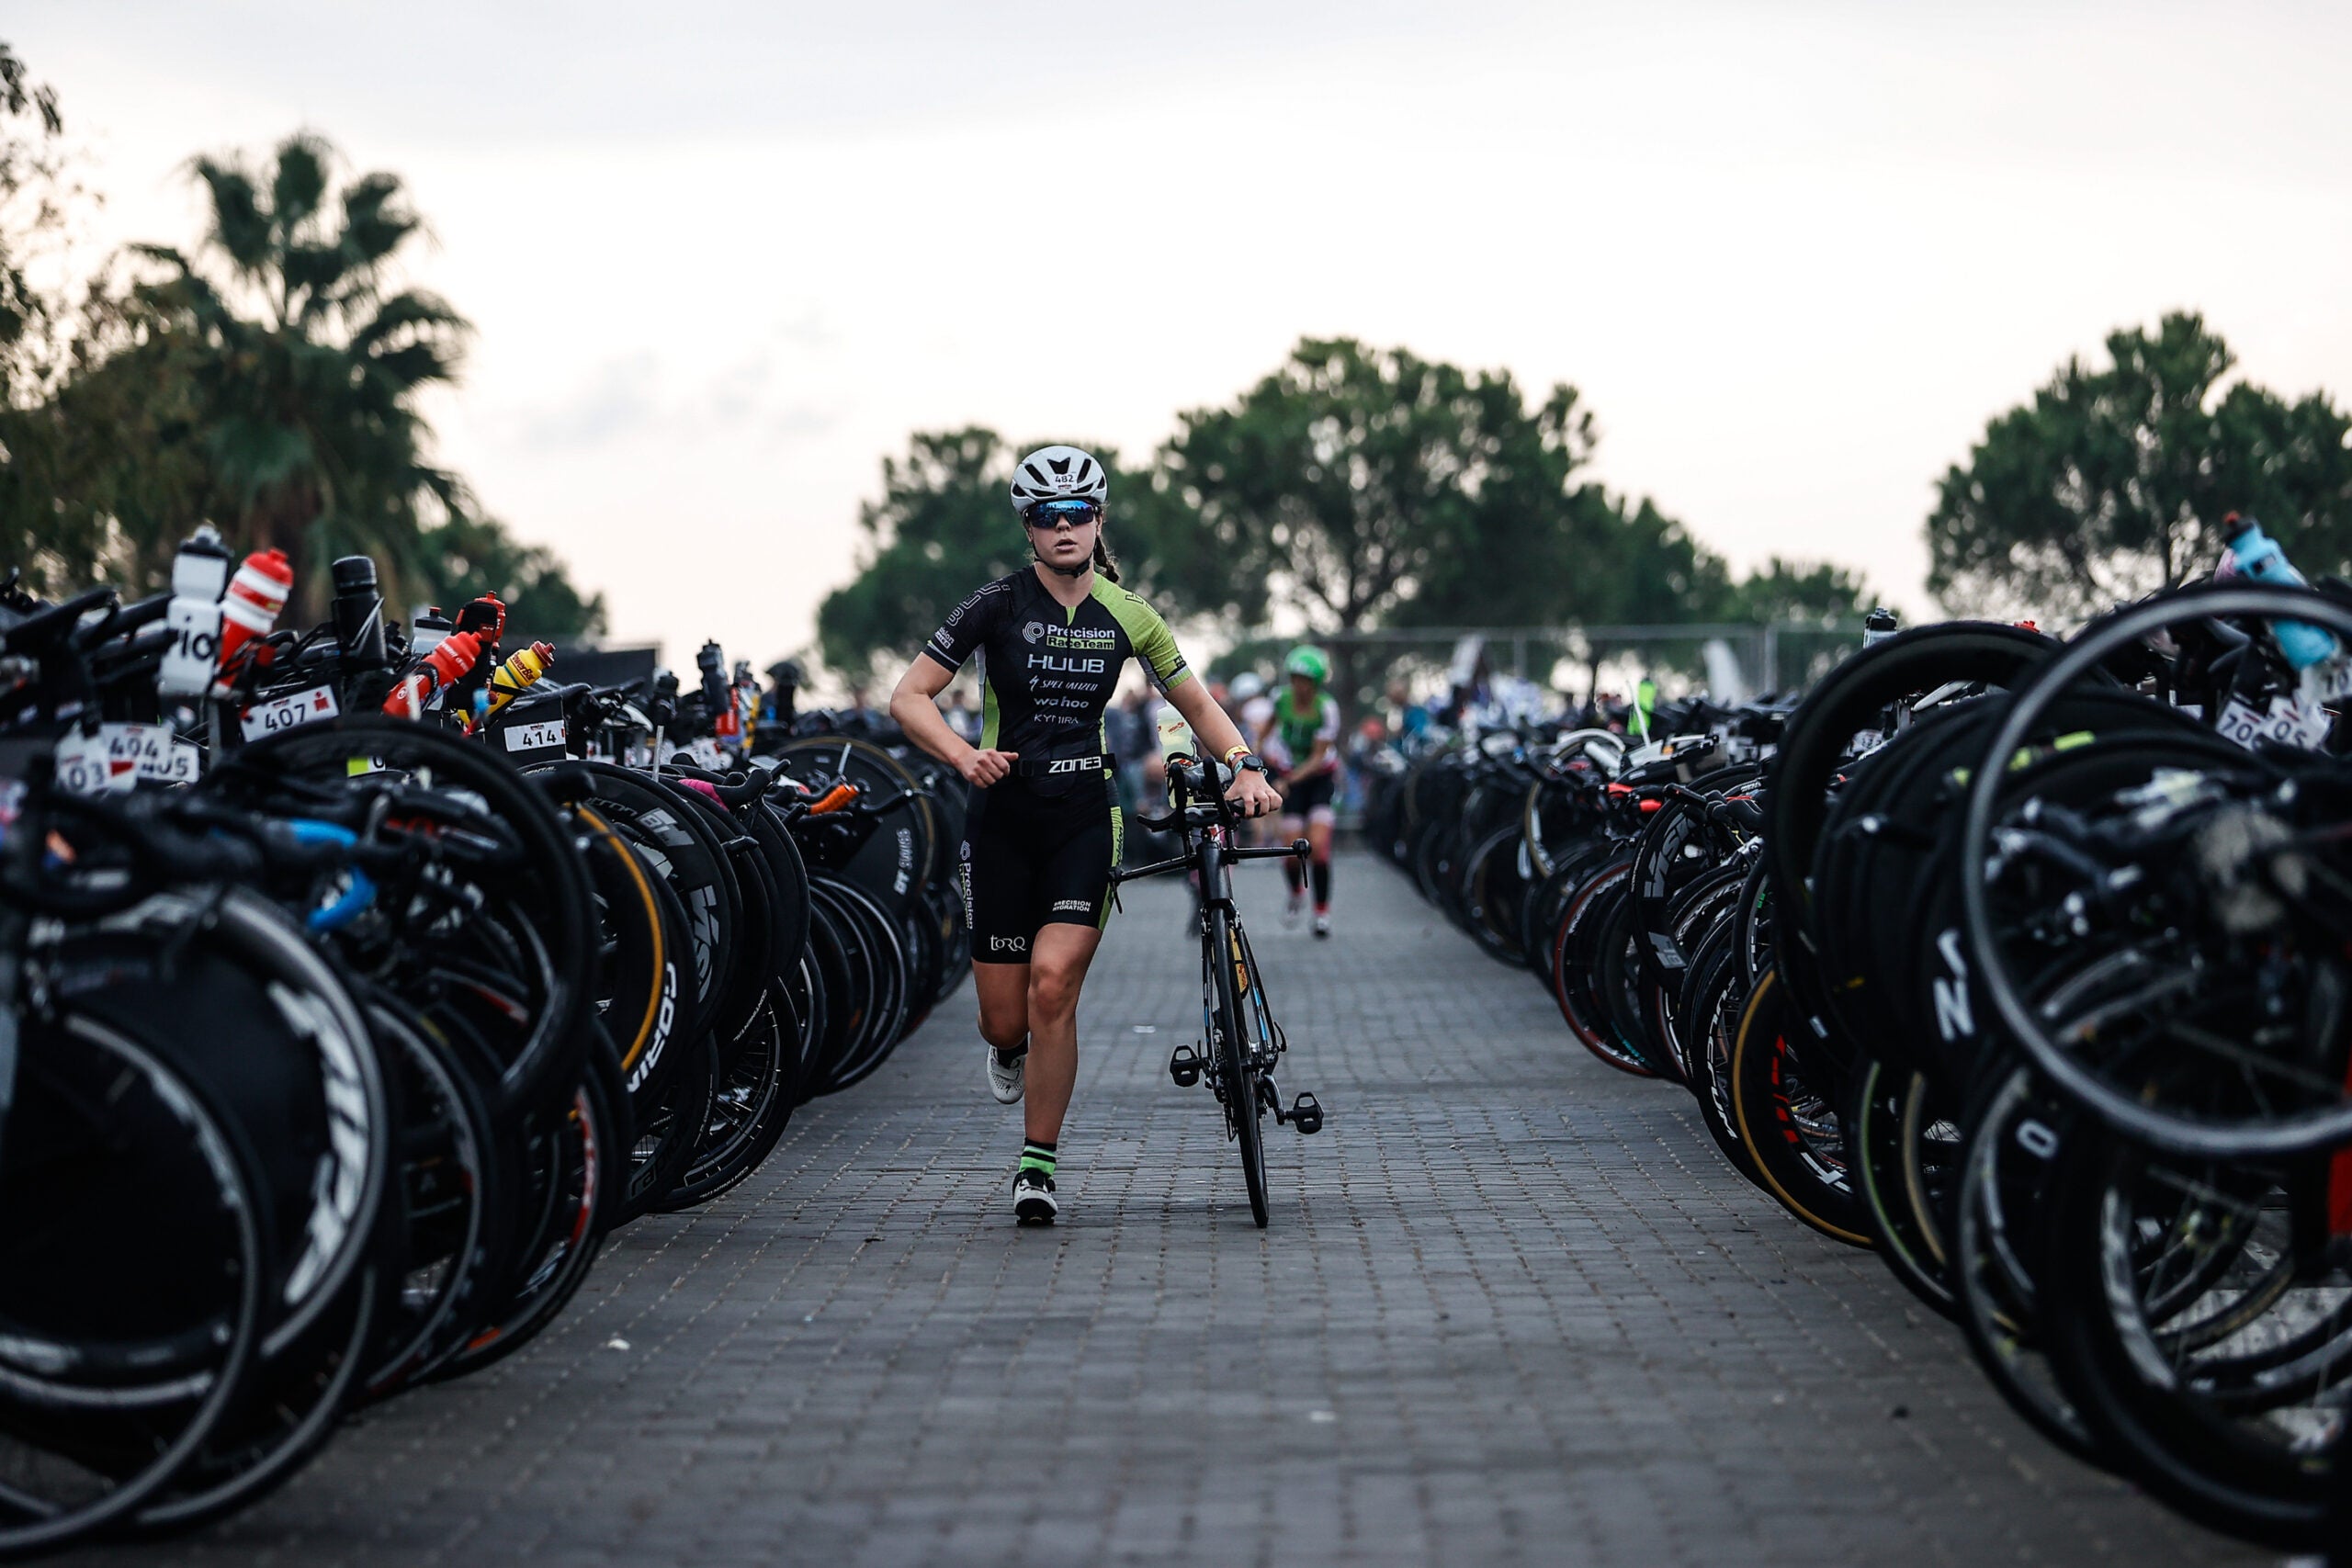 A triathlete makes her way through the transition area of a half ironman. Racing a 70.3 requires a lot of gear.